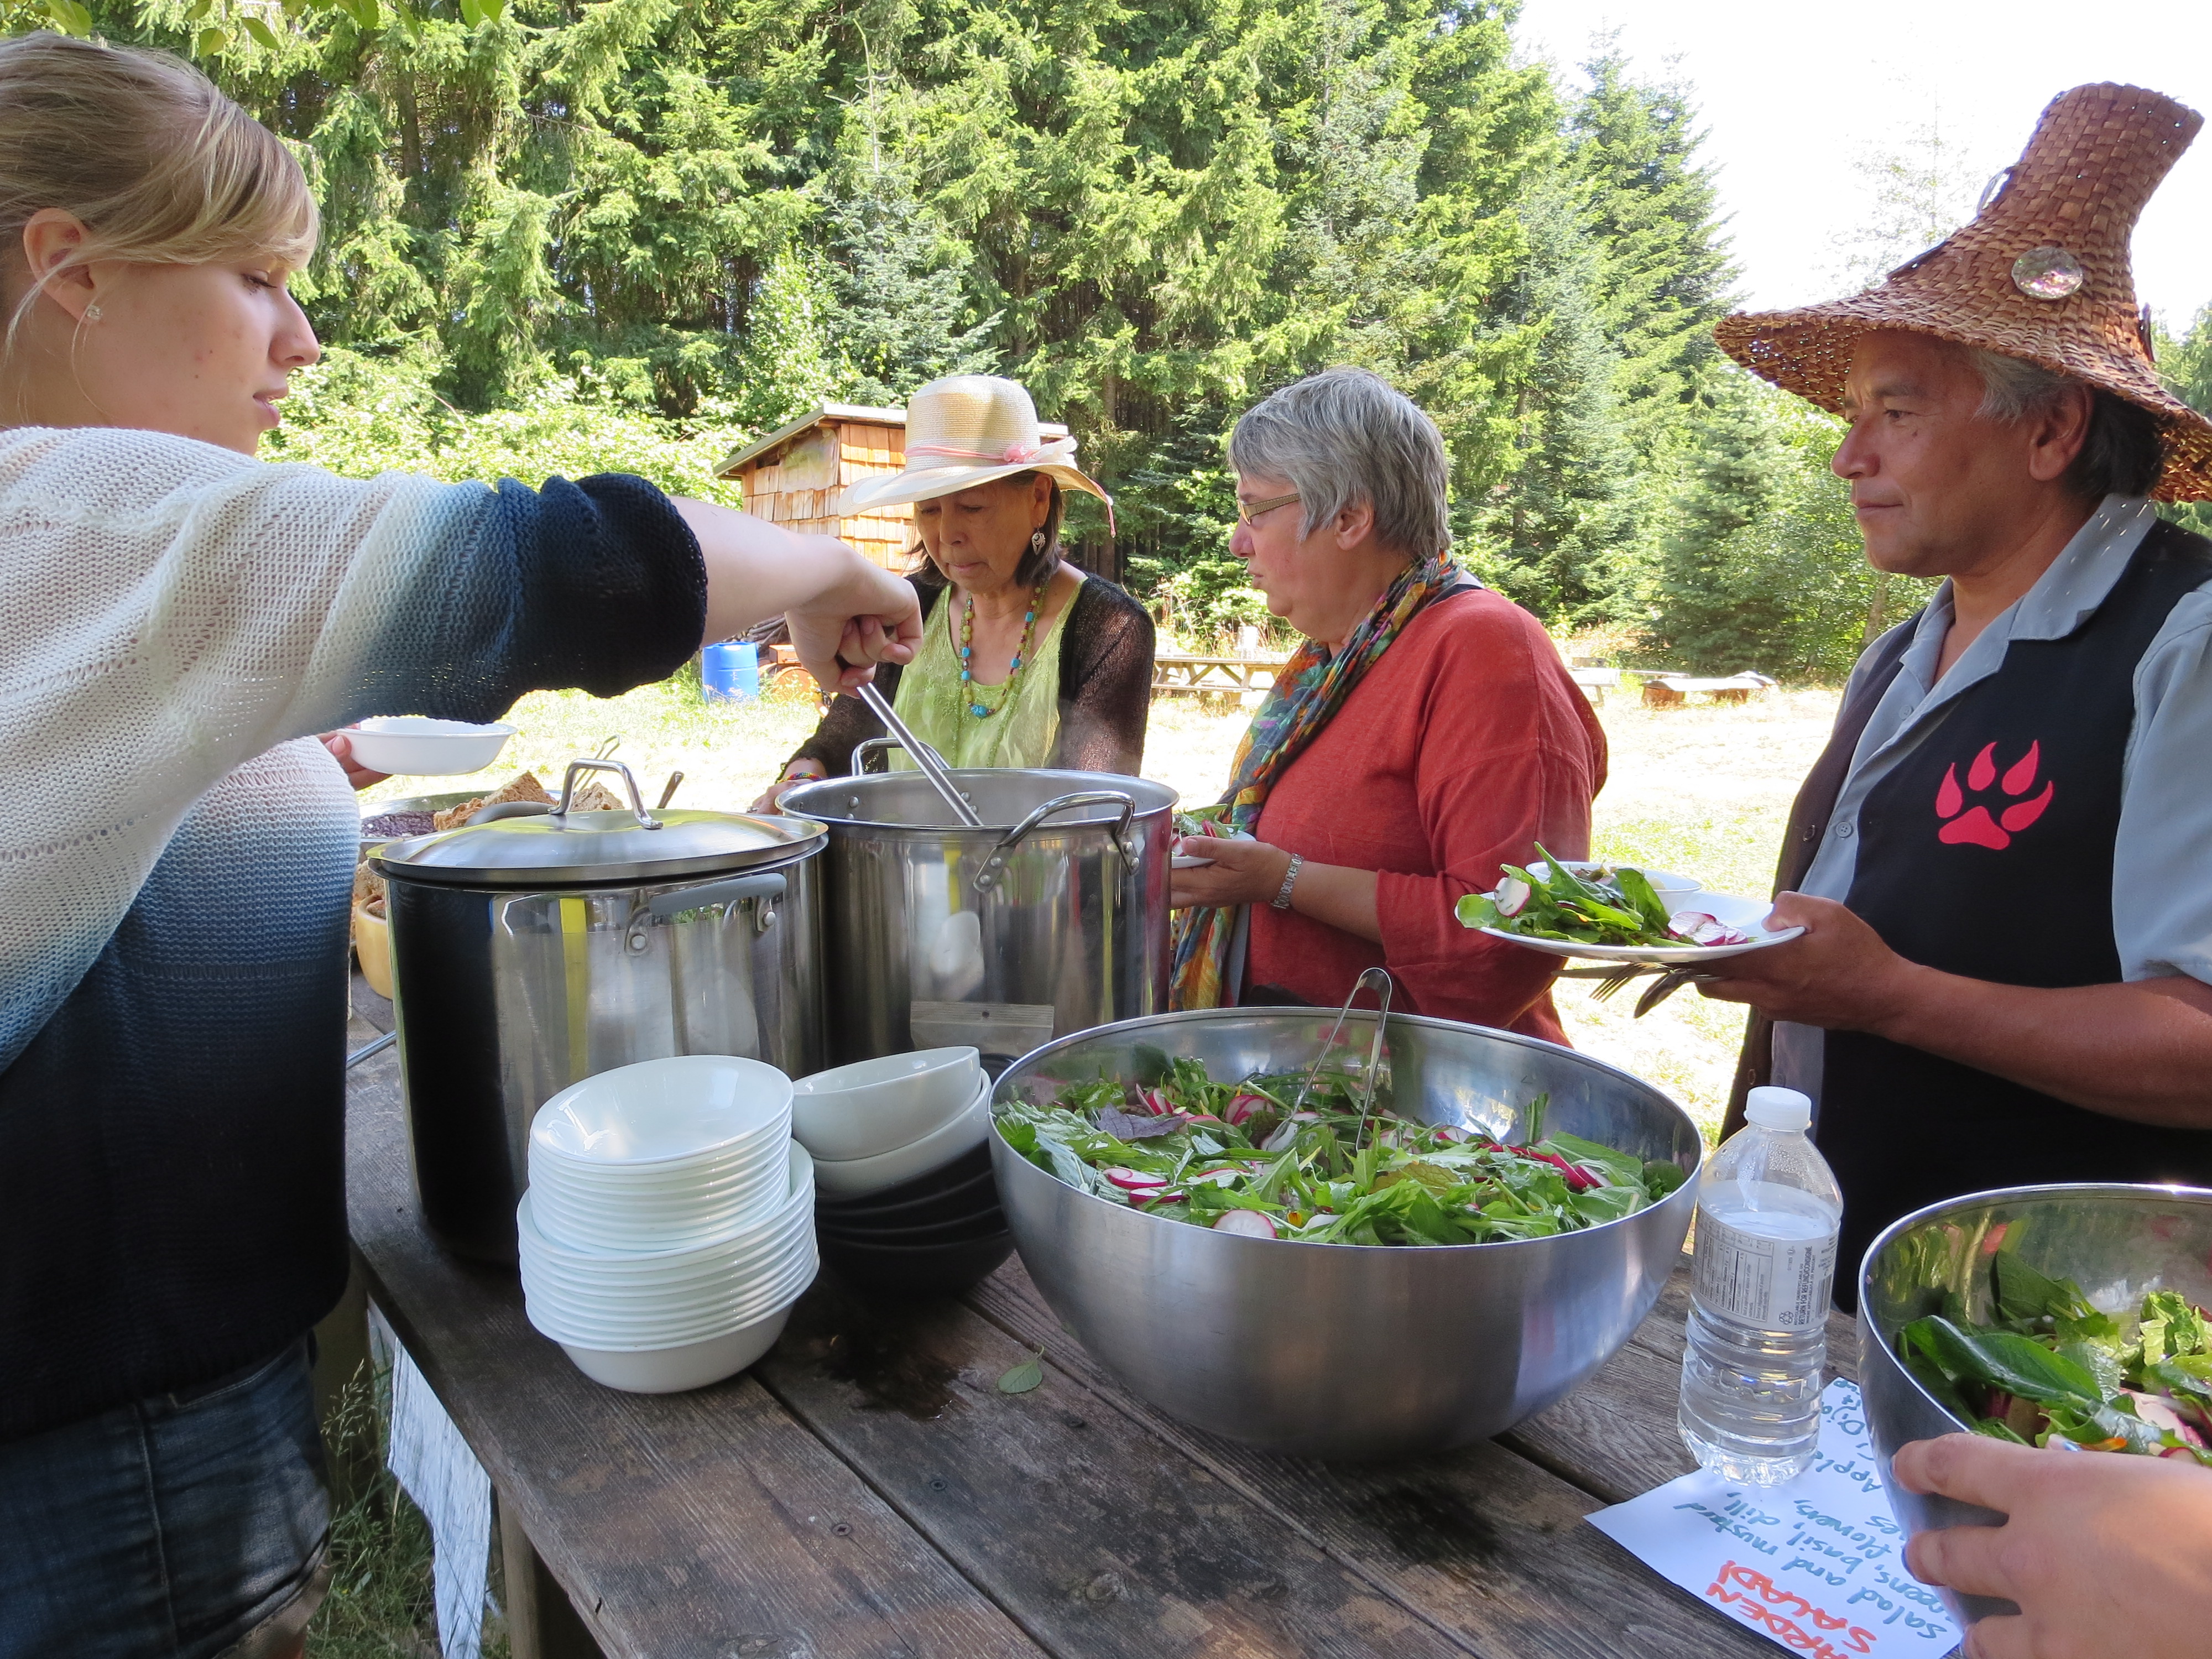 UBC students have the unique opportunity to undertake directed studies internships with the Indigenous Initiatives. Pictured here: the 2014 Feast Bowl Intern serves lunch to Elders.